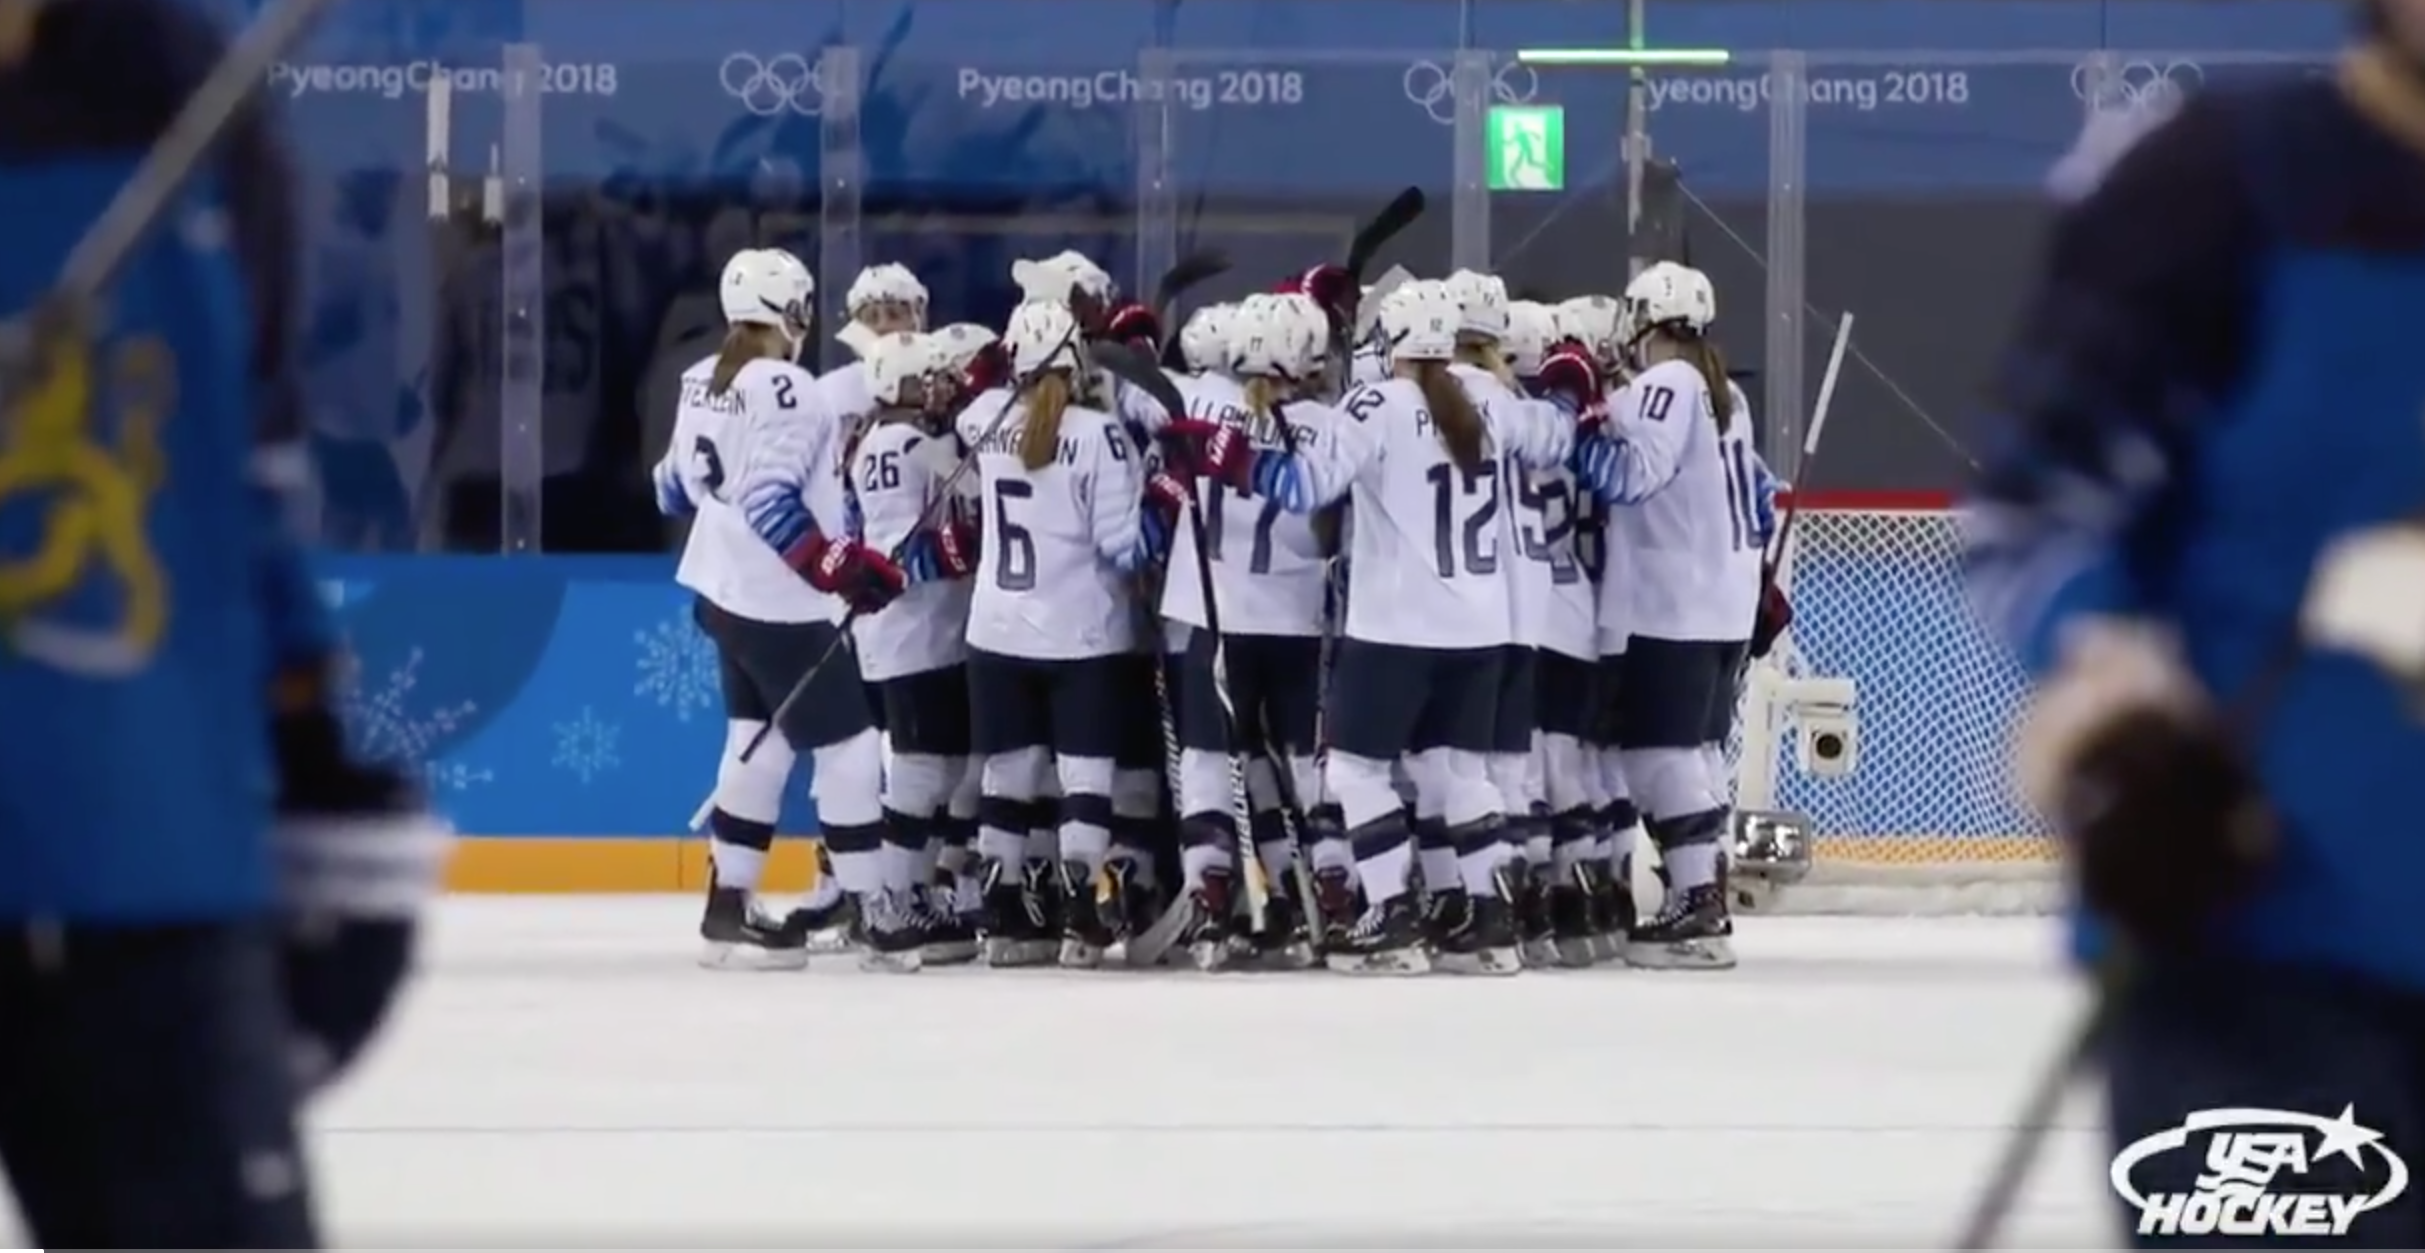 Women's Hockey in Pyeongchang: Days 1 and 2